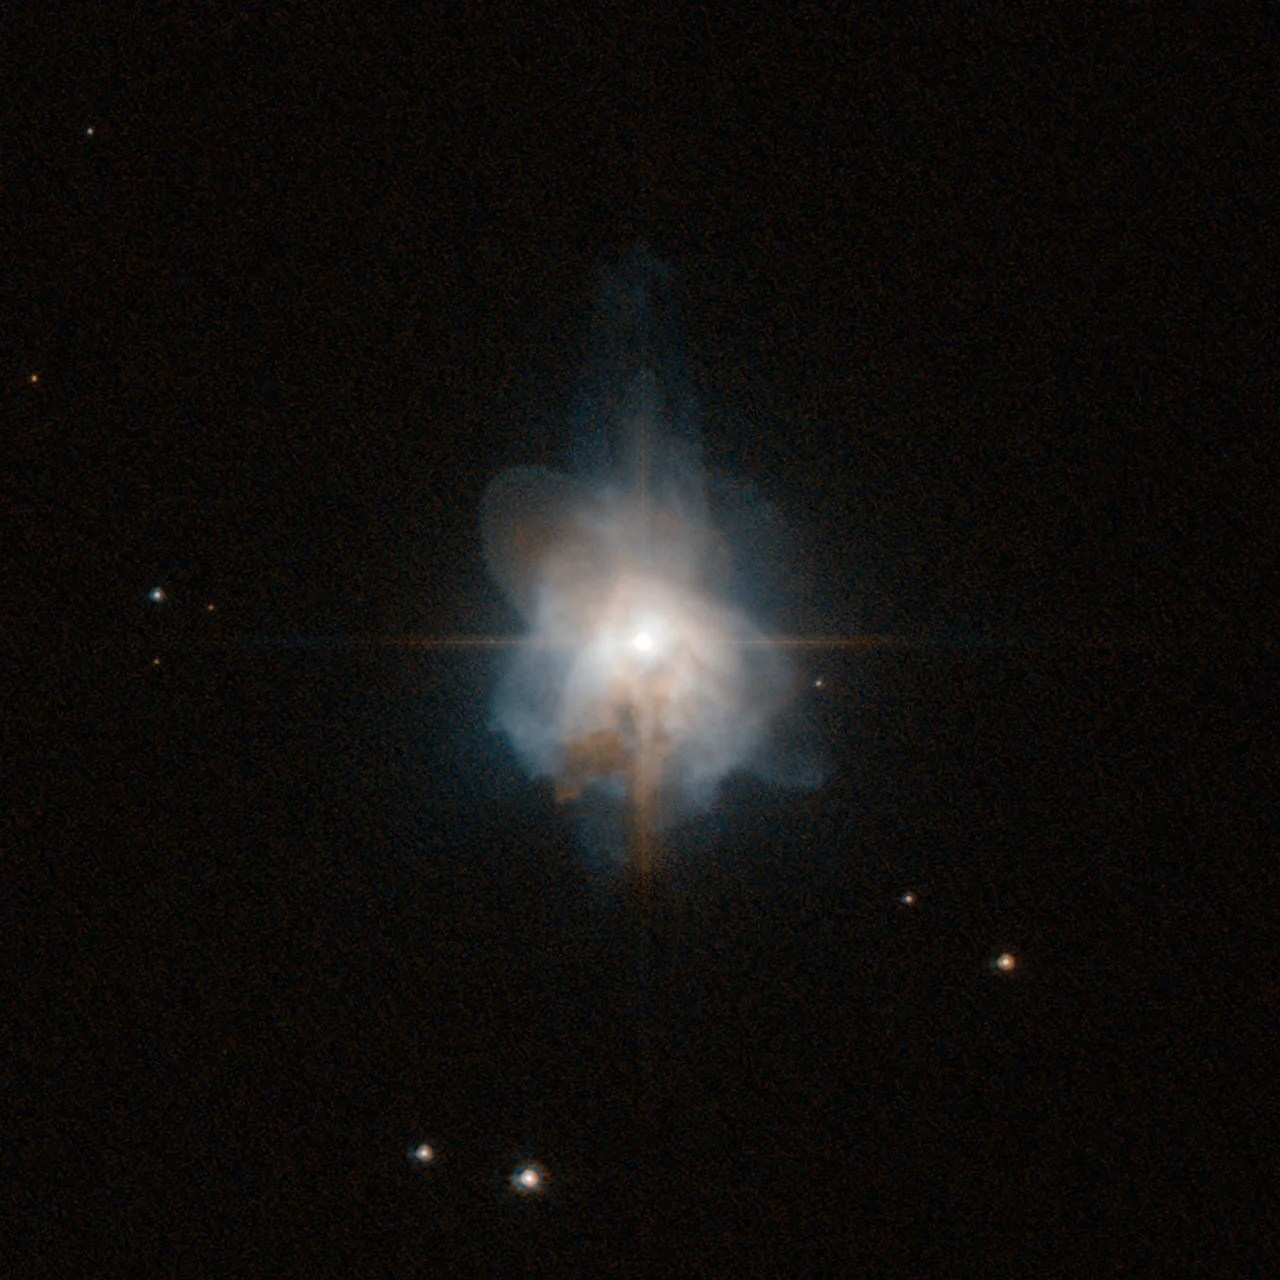 hubble image of hen3-1333 is a bright star surrounded by a hazy film